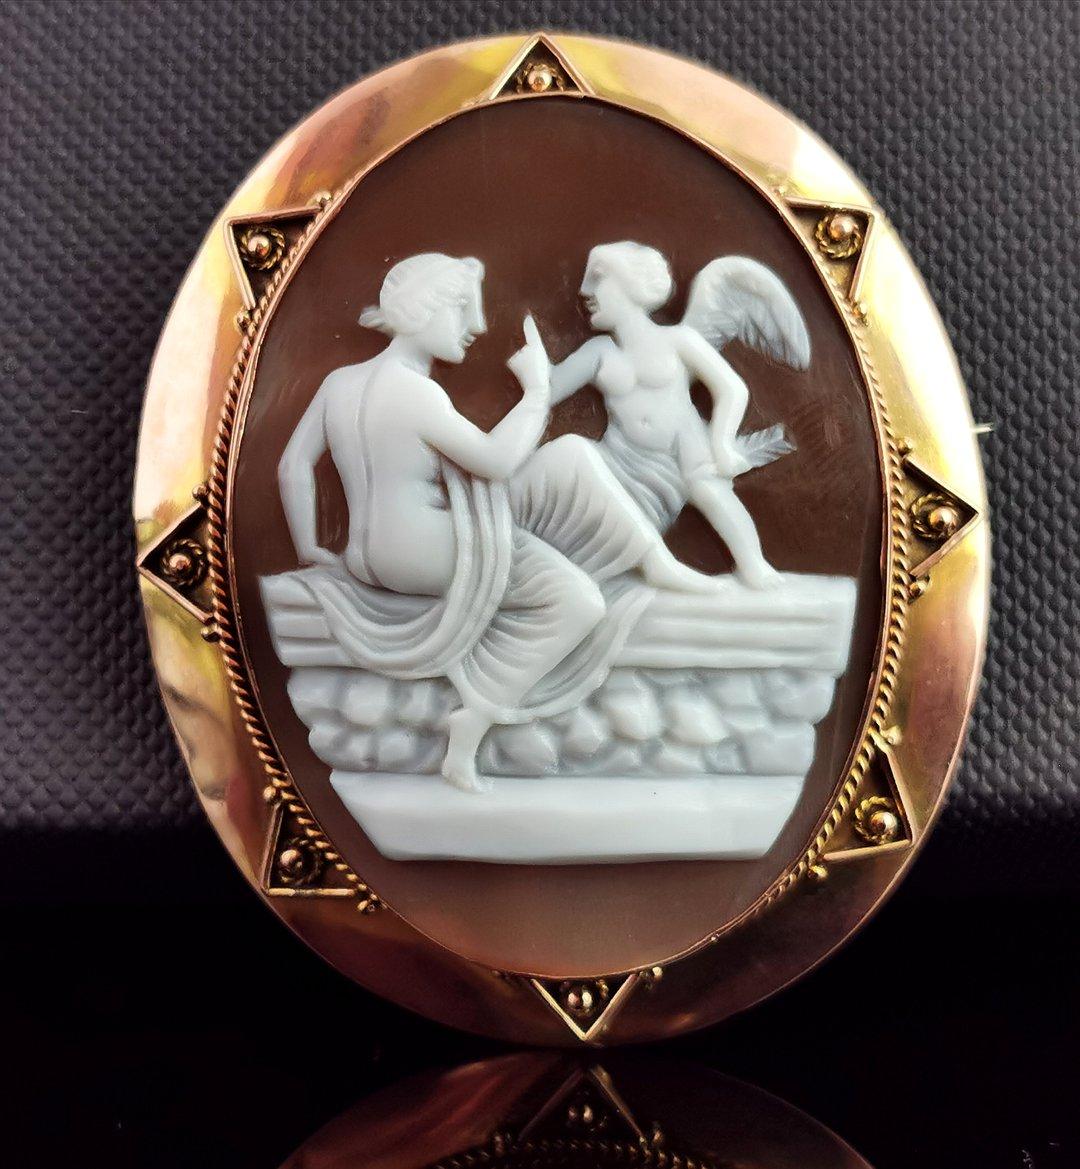 An outstanding rare, antique, Victorian era cameo brooch.

What makes this cameo special is the subject matter and it is always desirable to find unusual or fine carvings on these beautifully crafted pieces of jewellery.

This particular cameo